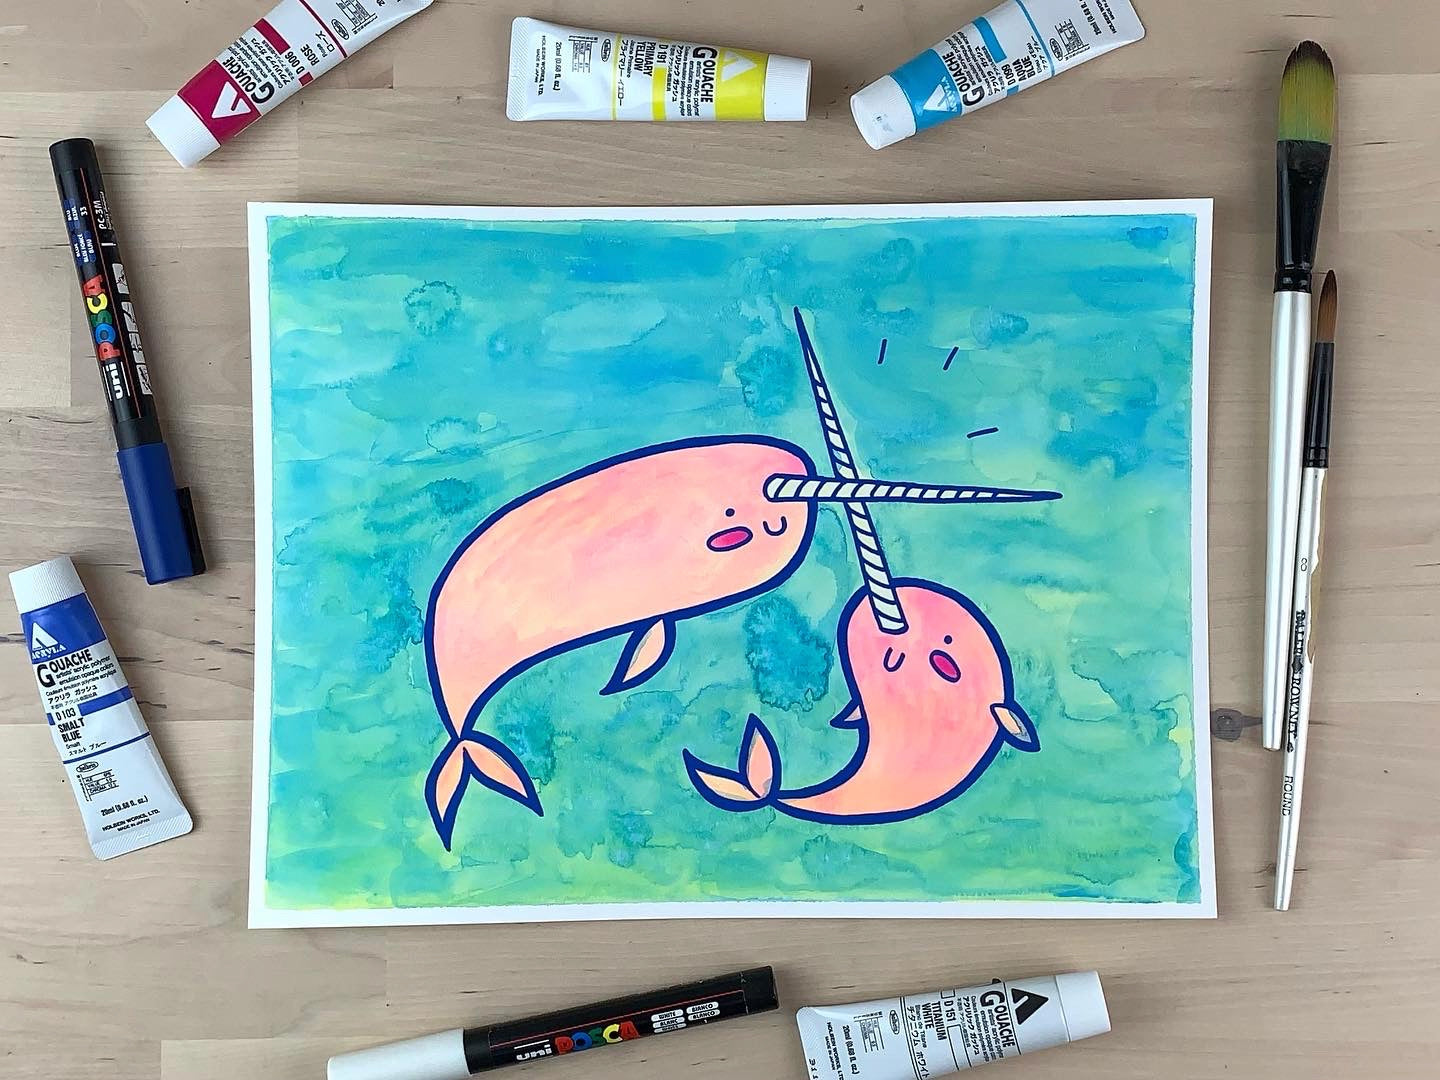 Painting of two pink narwhals fighting with their tusks.